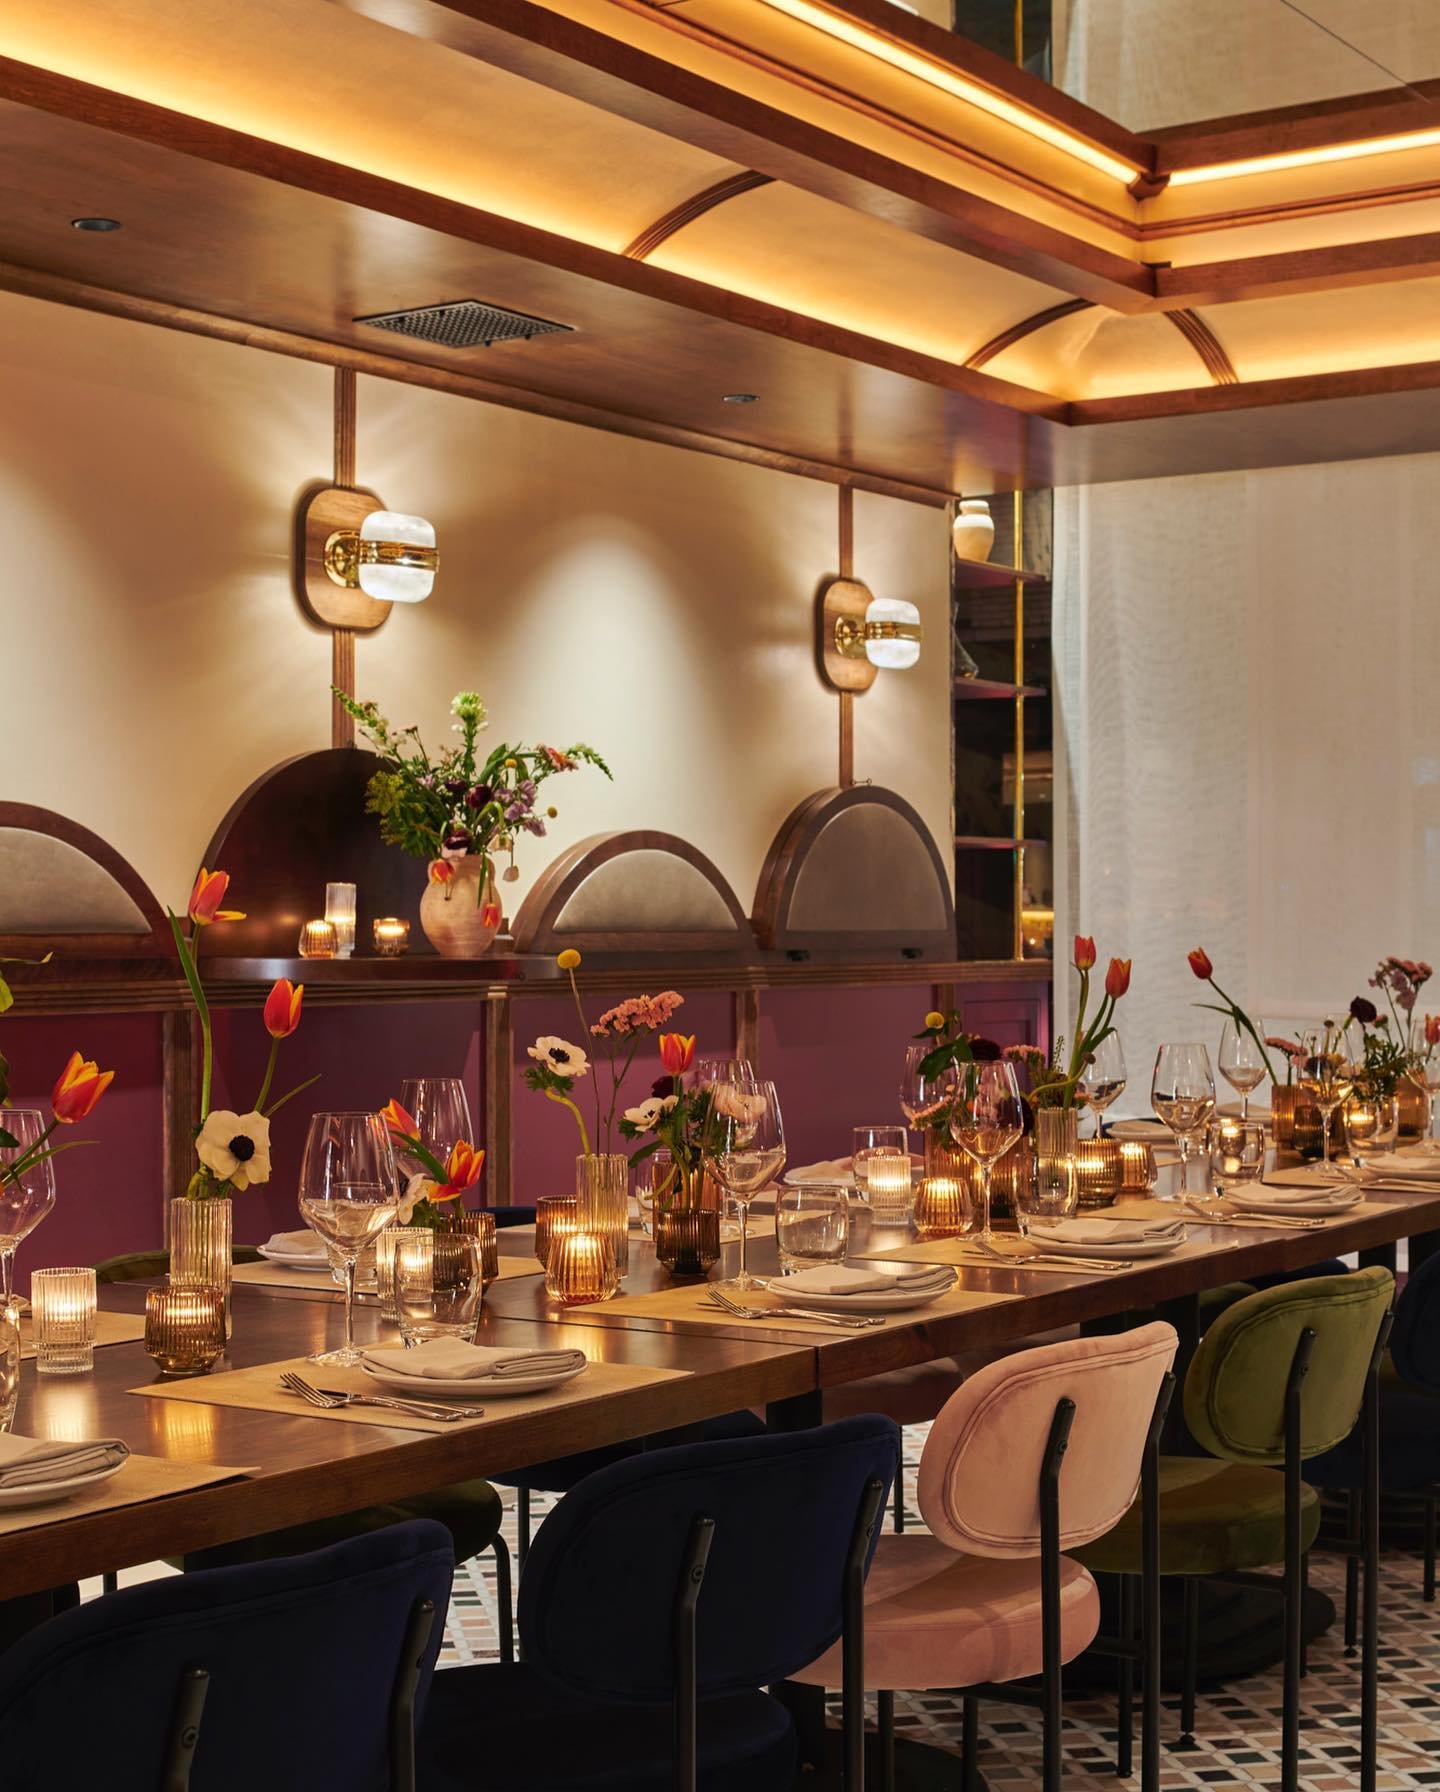 Evening glow at @LArtusiSupperClub ✨ The space takes cues from the ambiance of a luxurious train car journeying through Europe. 

Styling by @jr.b.l and @hkg_112 
📷 @macchiaphoto
🦊 #EBolognino